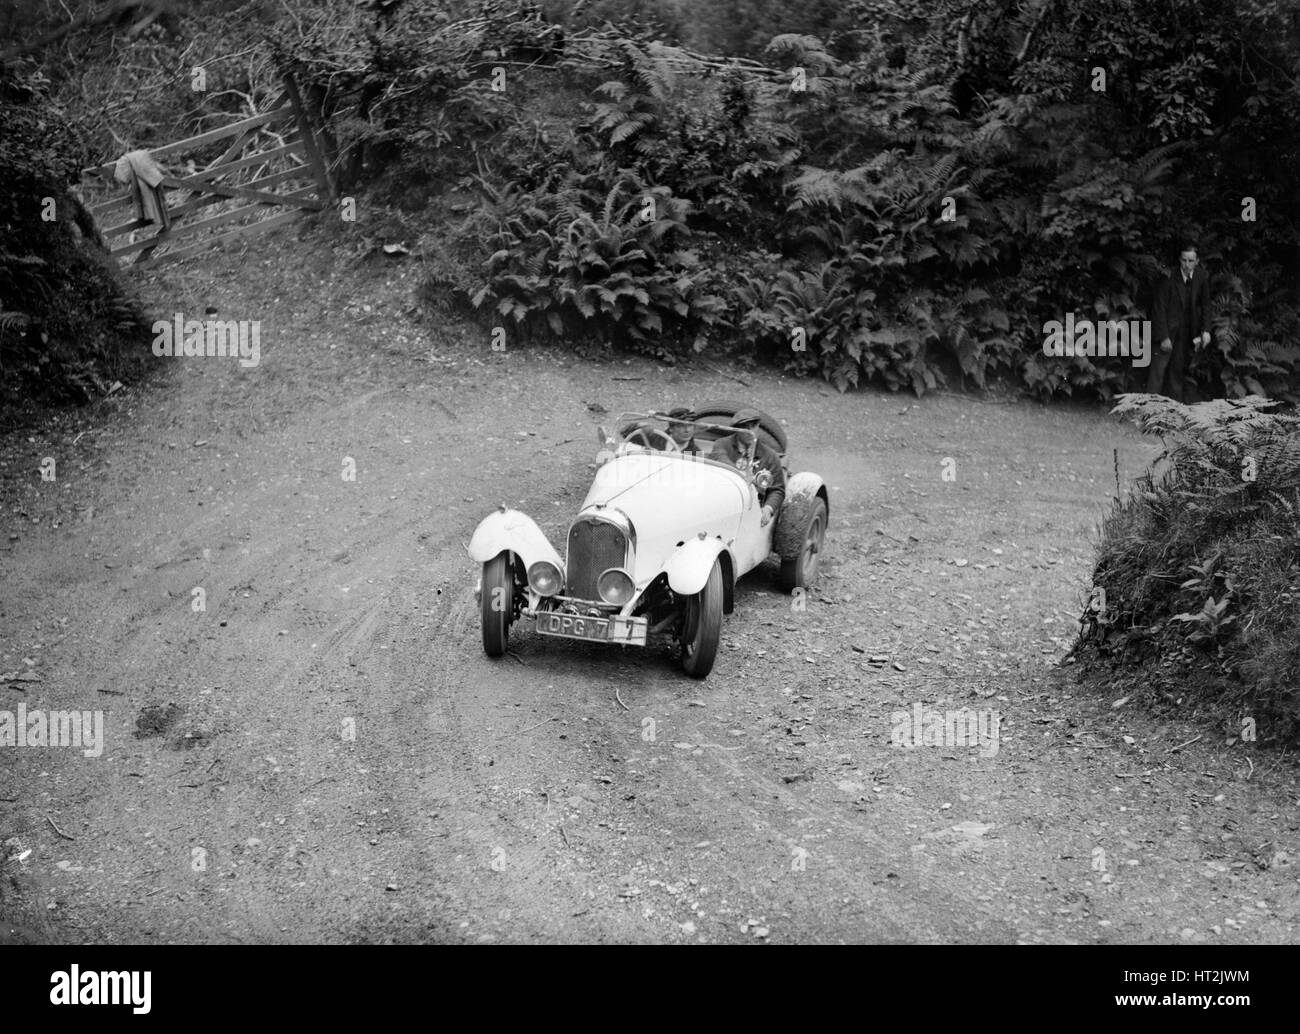 Marendaz Competion 2-seater special 15/90 of Mrs NA Moss driving in a motoring trial, late 1930s. Artist: Bill Brunell. Stock Photo